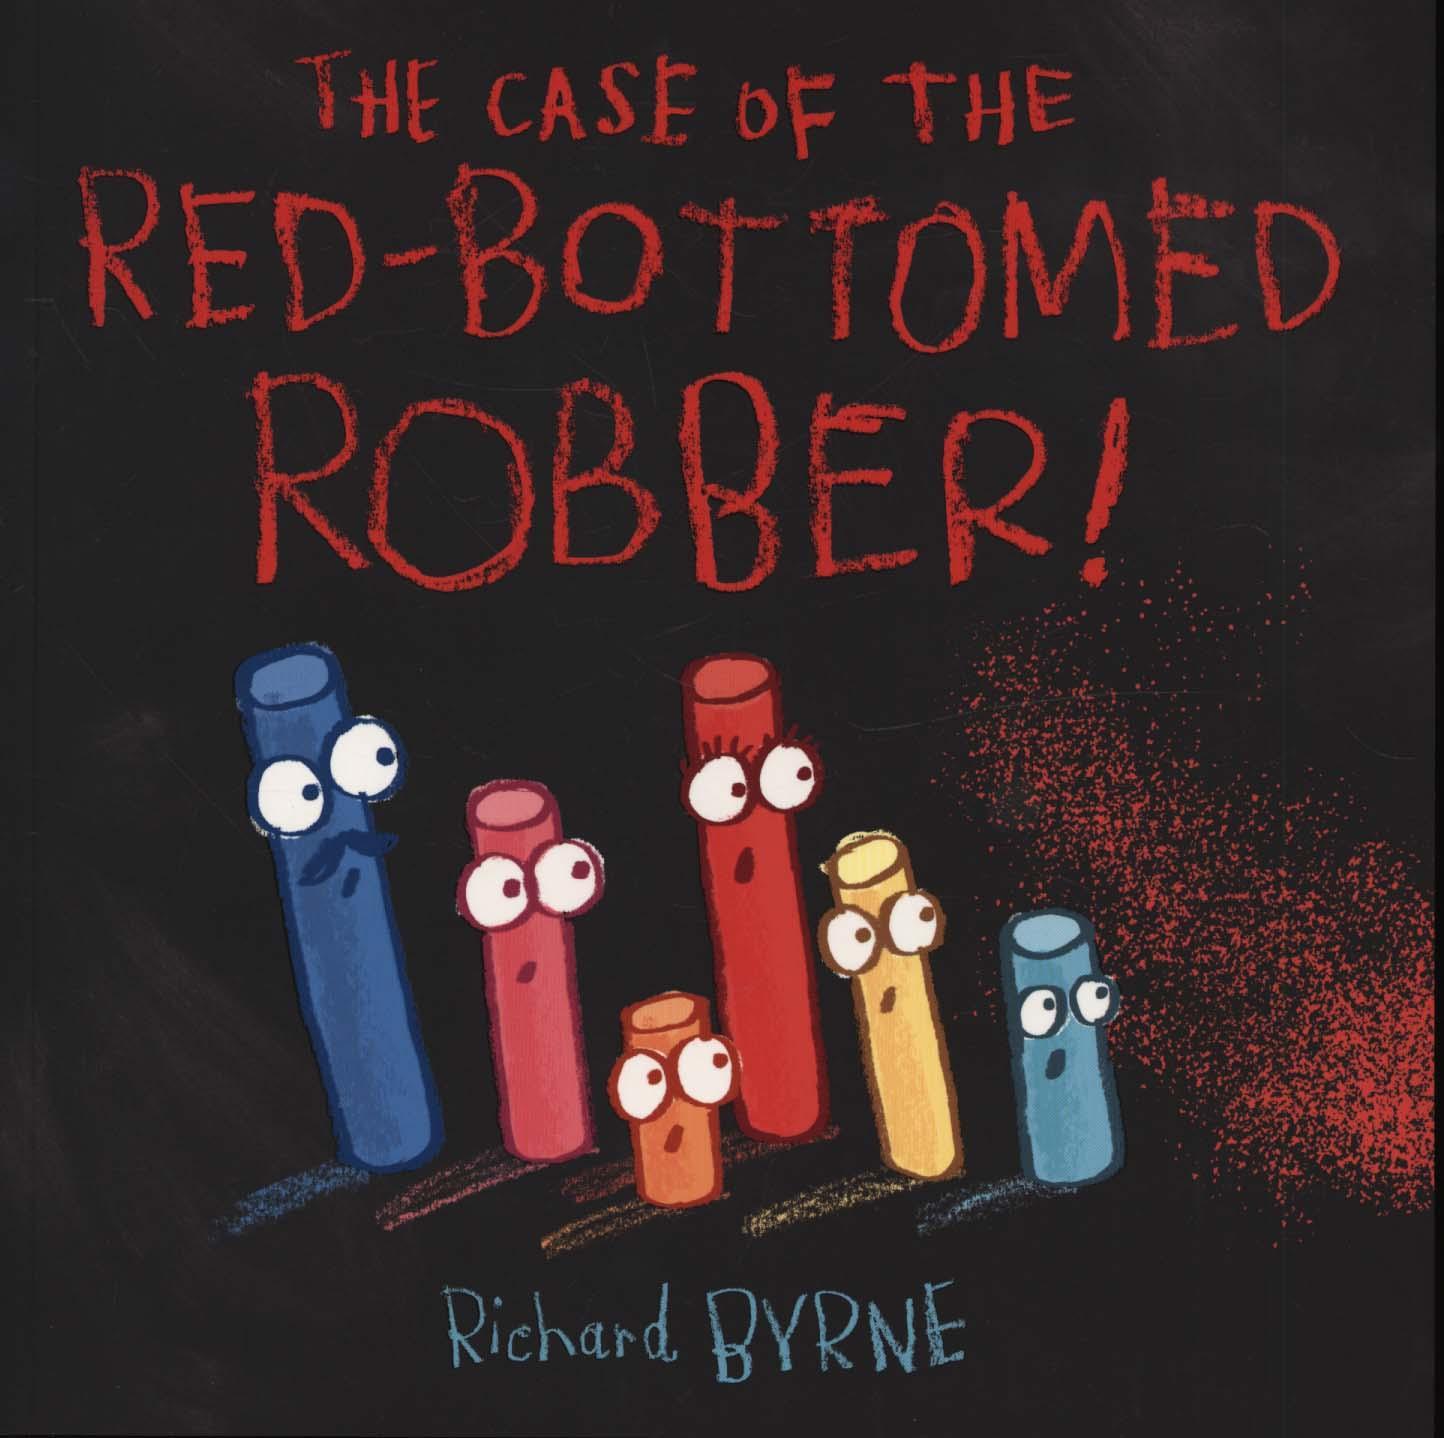 Case of the Red-Bottomed Robber